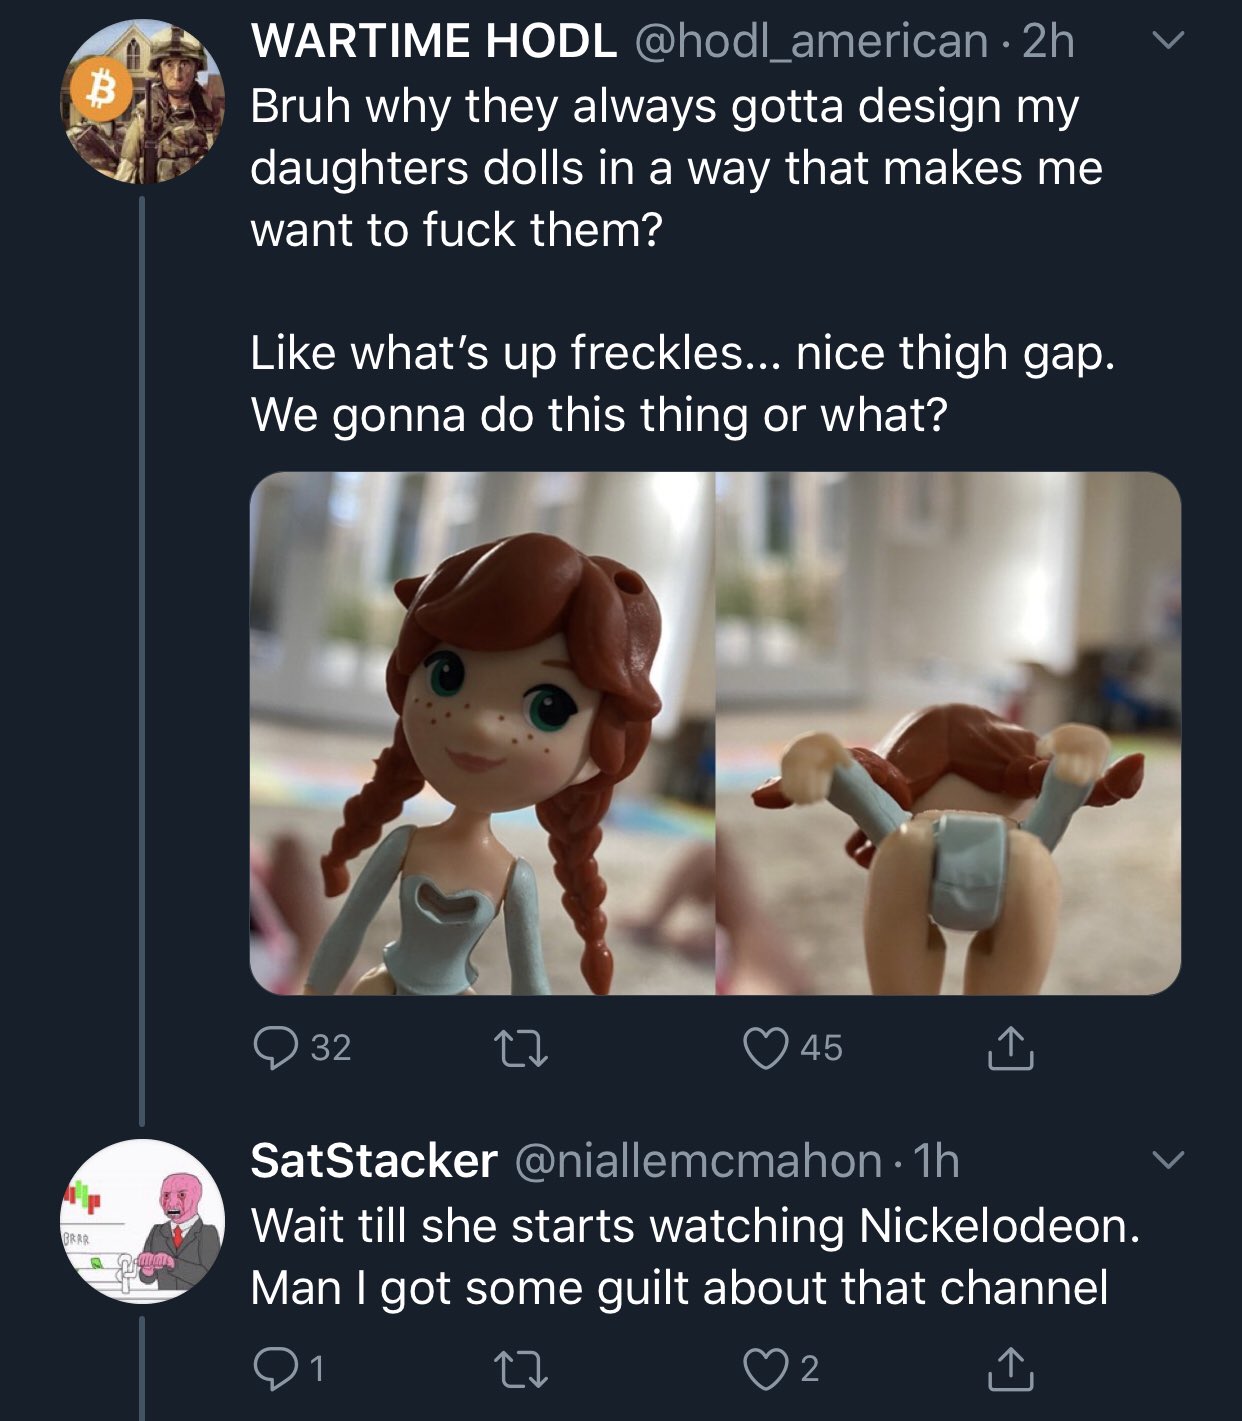 photo caption - V Wartime Hodl 2h Bruh why they always gotta design my daughters dolls in a way that makes me want to fuck them? what's up freckles... nice thigh gap. We gonna do this thing or what? 932 22 45 Brrr SatStacker 1h Wait till she starts watchi